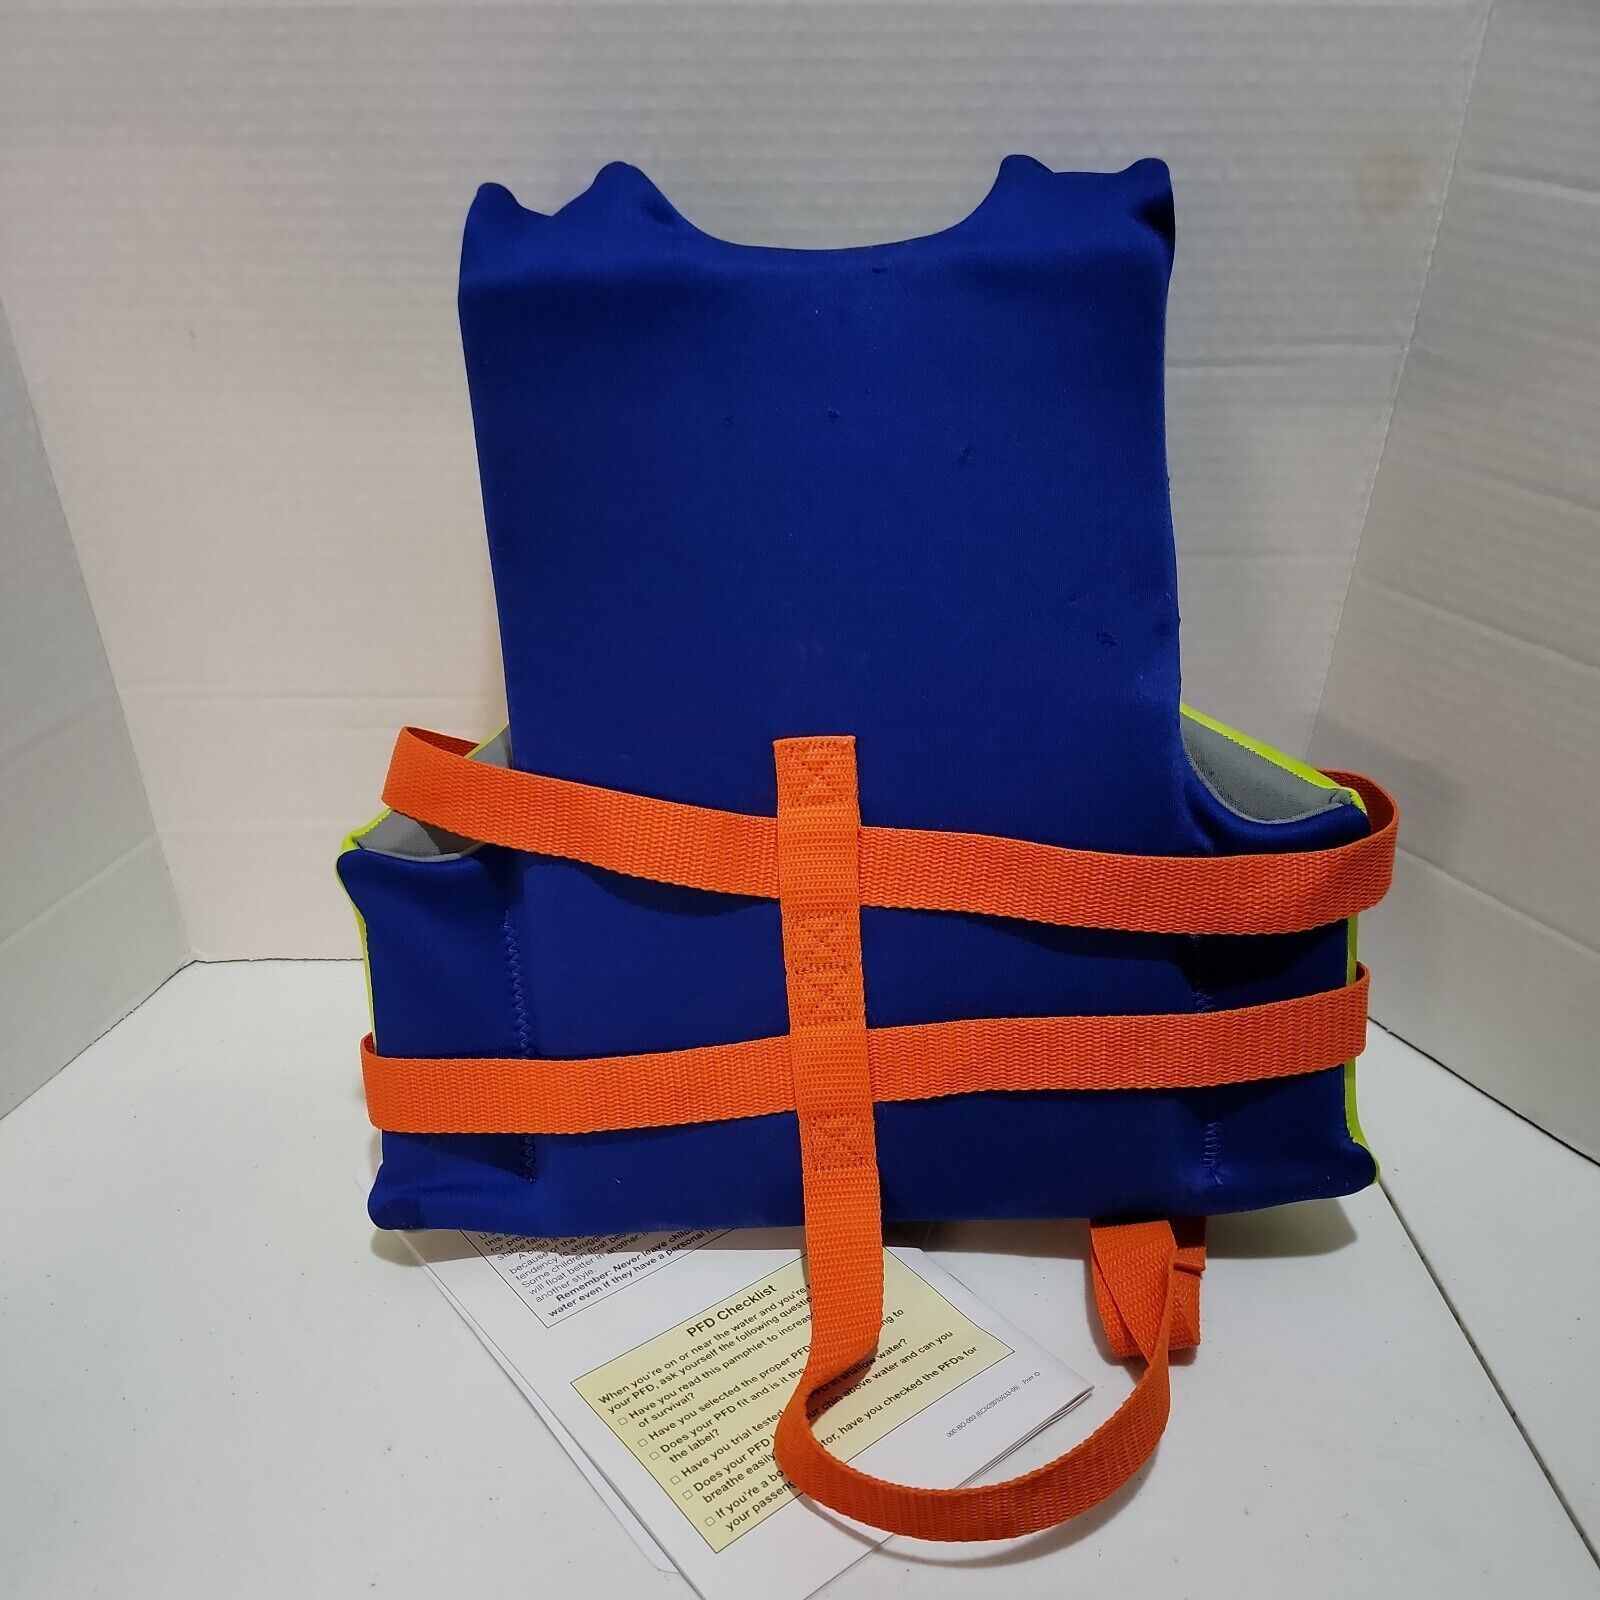 NEW Puddle Jumper Life Jacket Child 30-50lbs - Life Jackets & Preservers